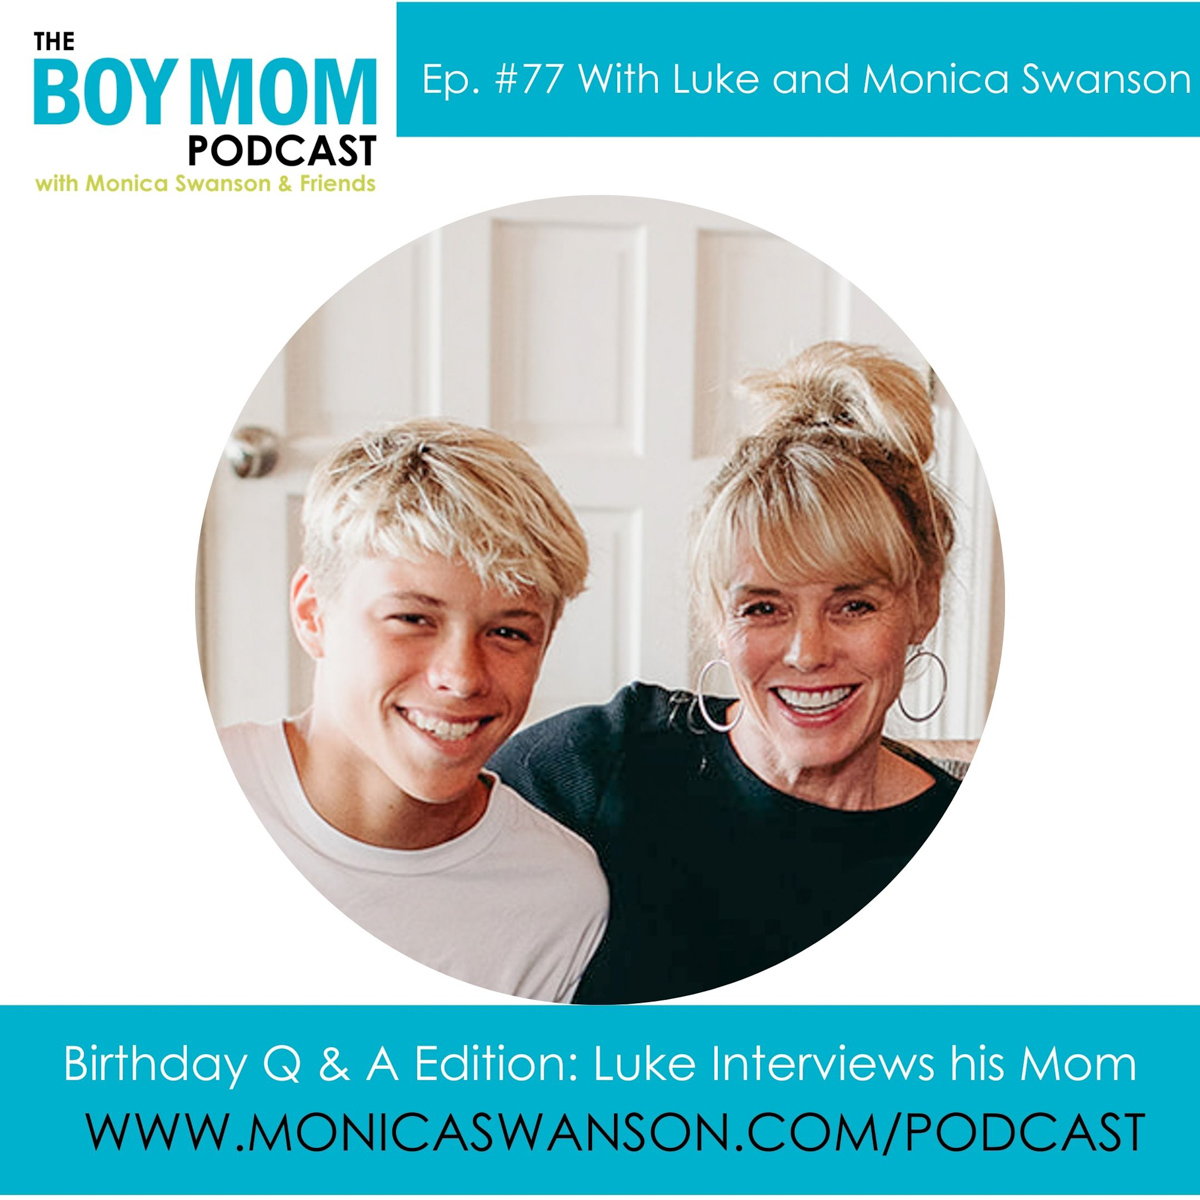 Birthday Q & A Podcast: With Luke Interviewing his Mom 😃 {Episode -77}